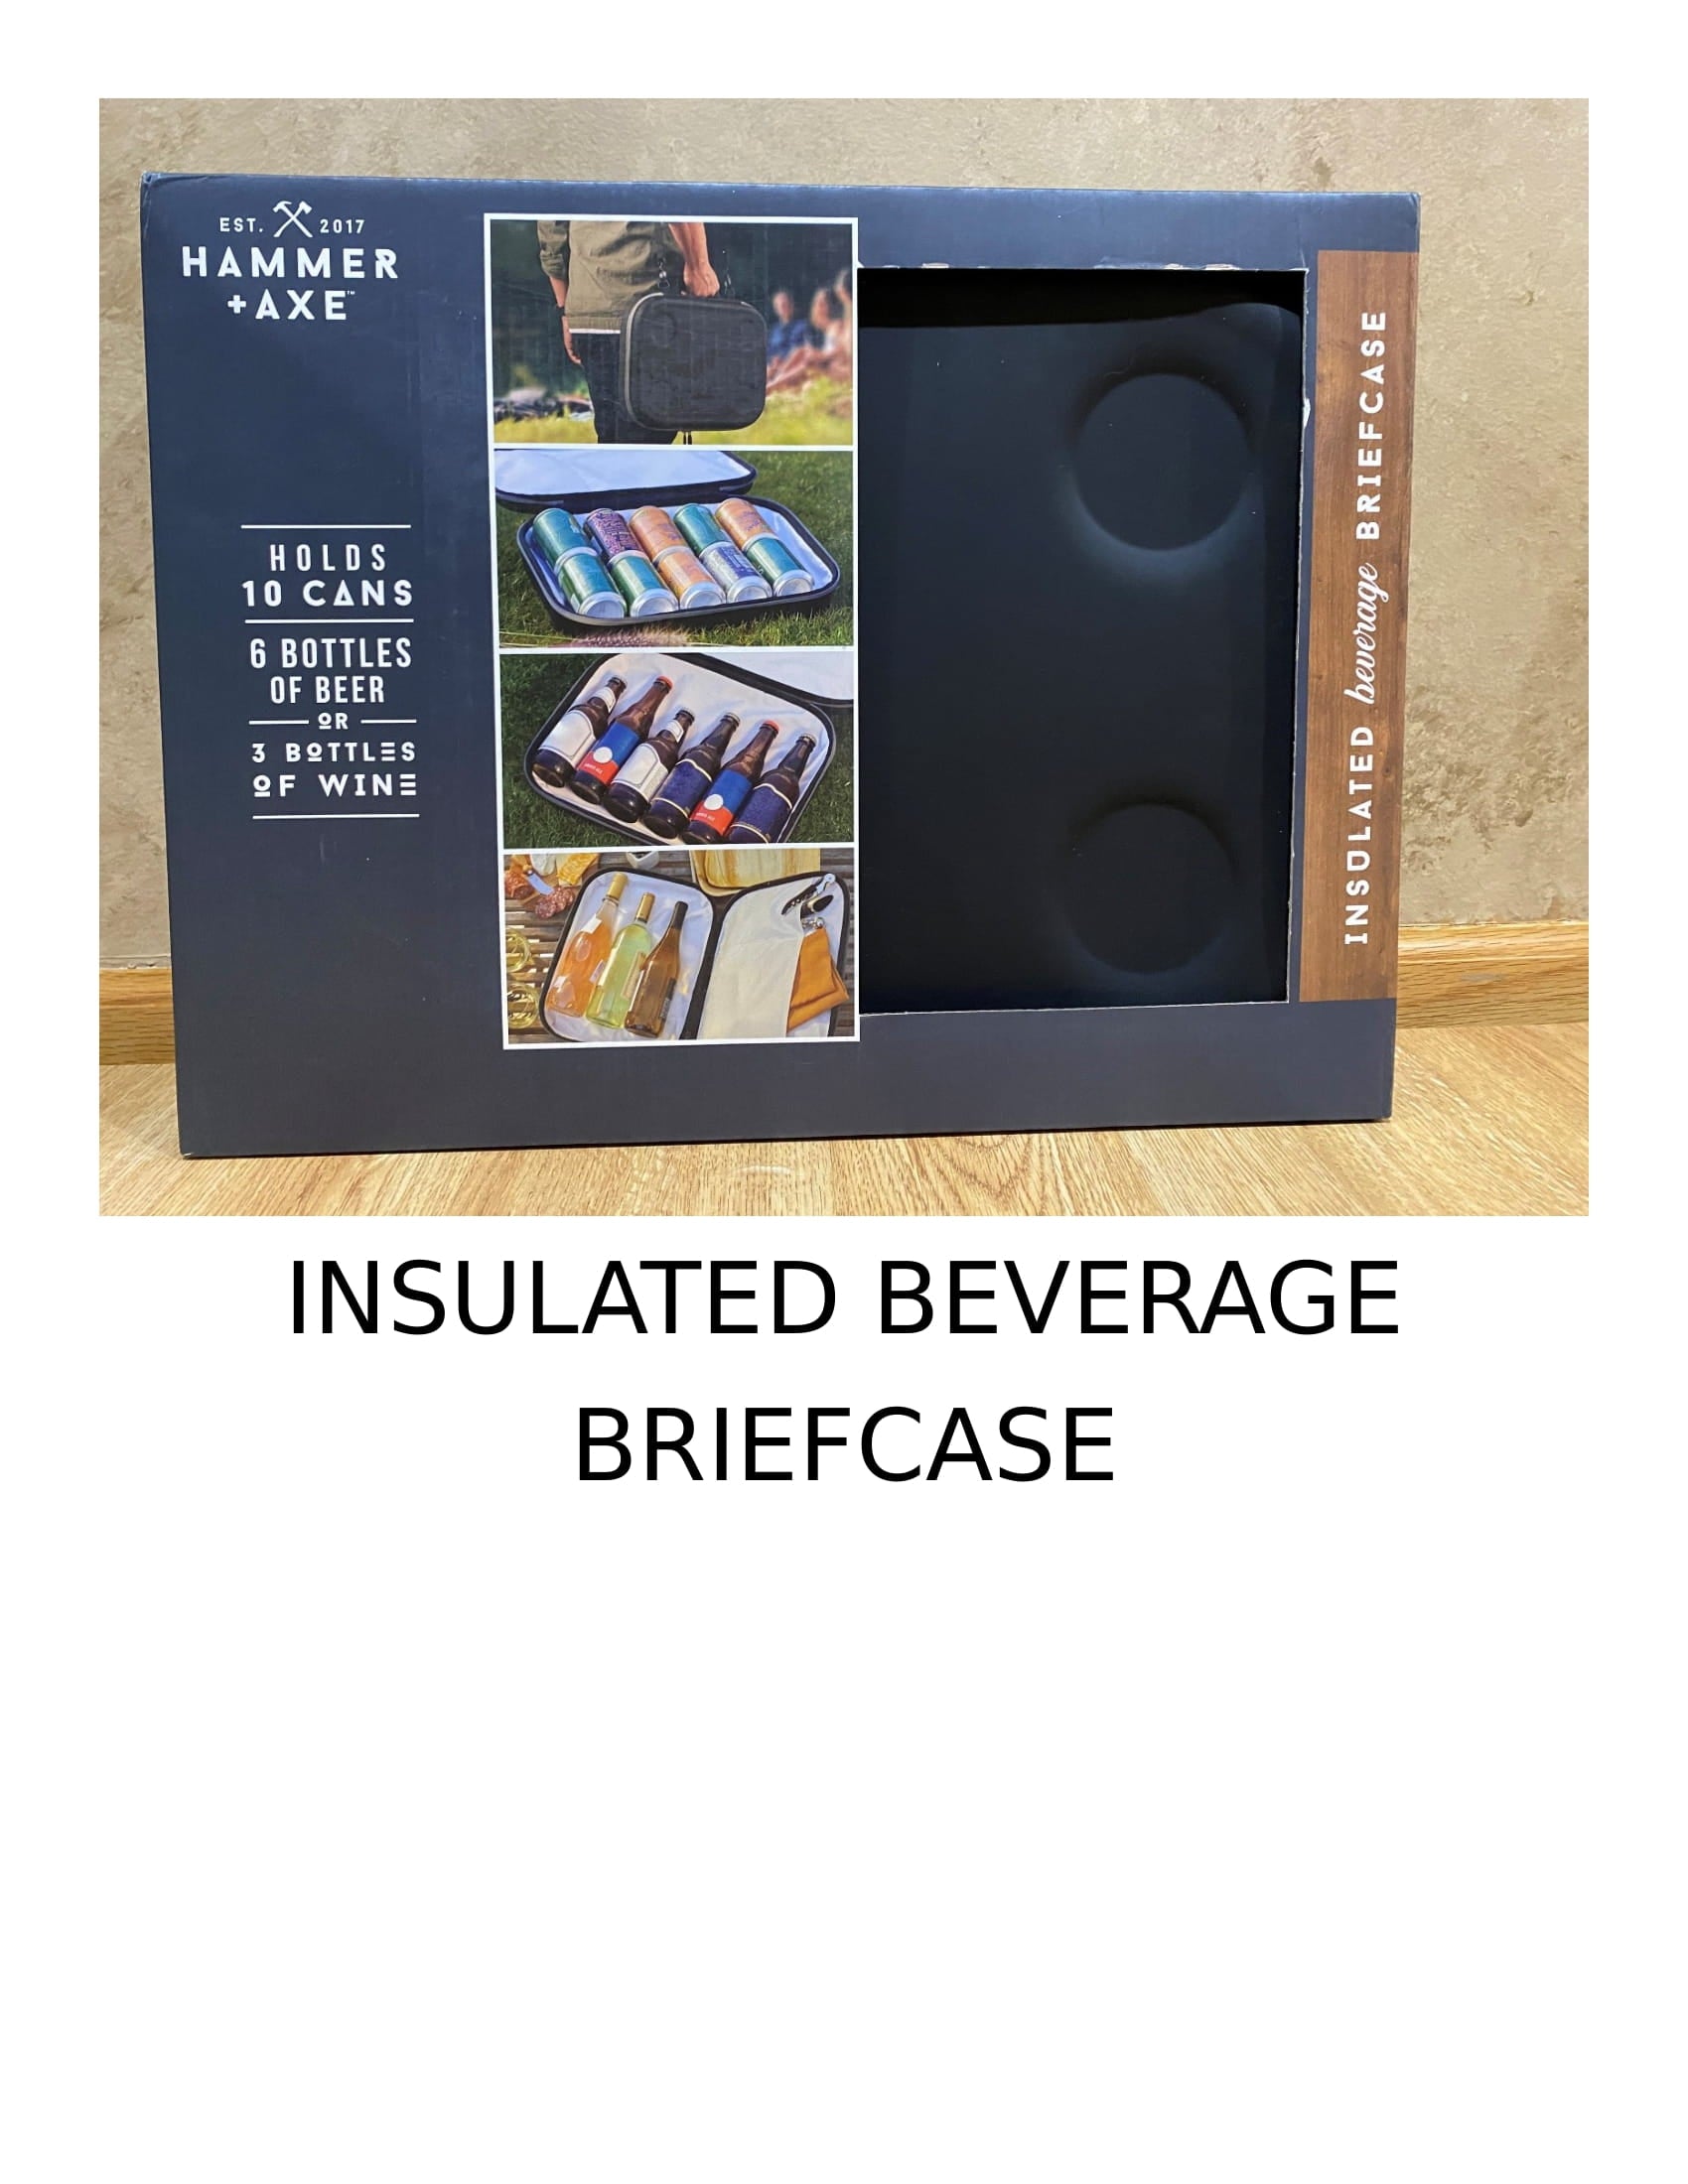 INSULATED BRIEFCASE